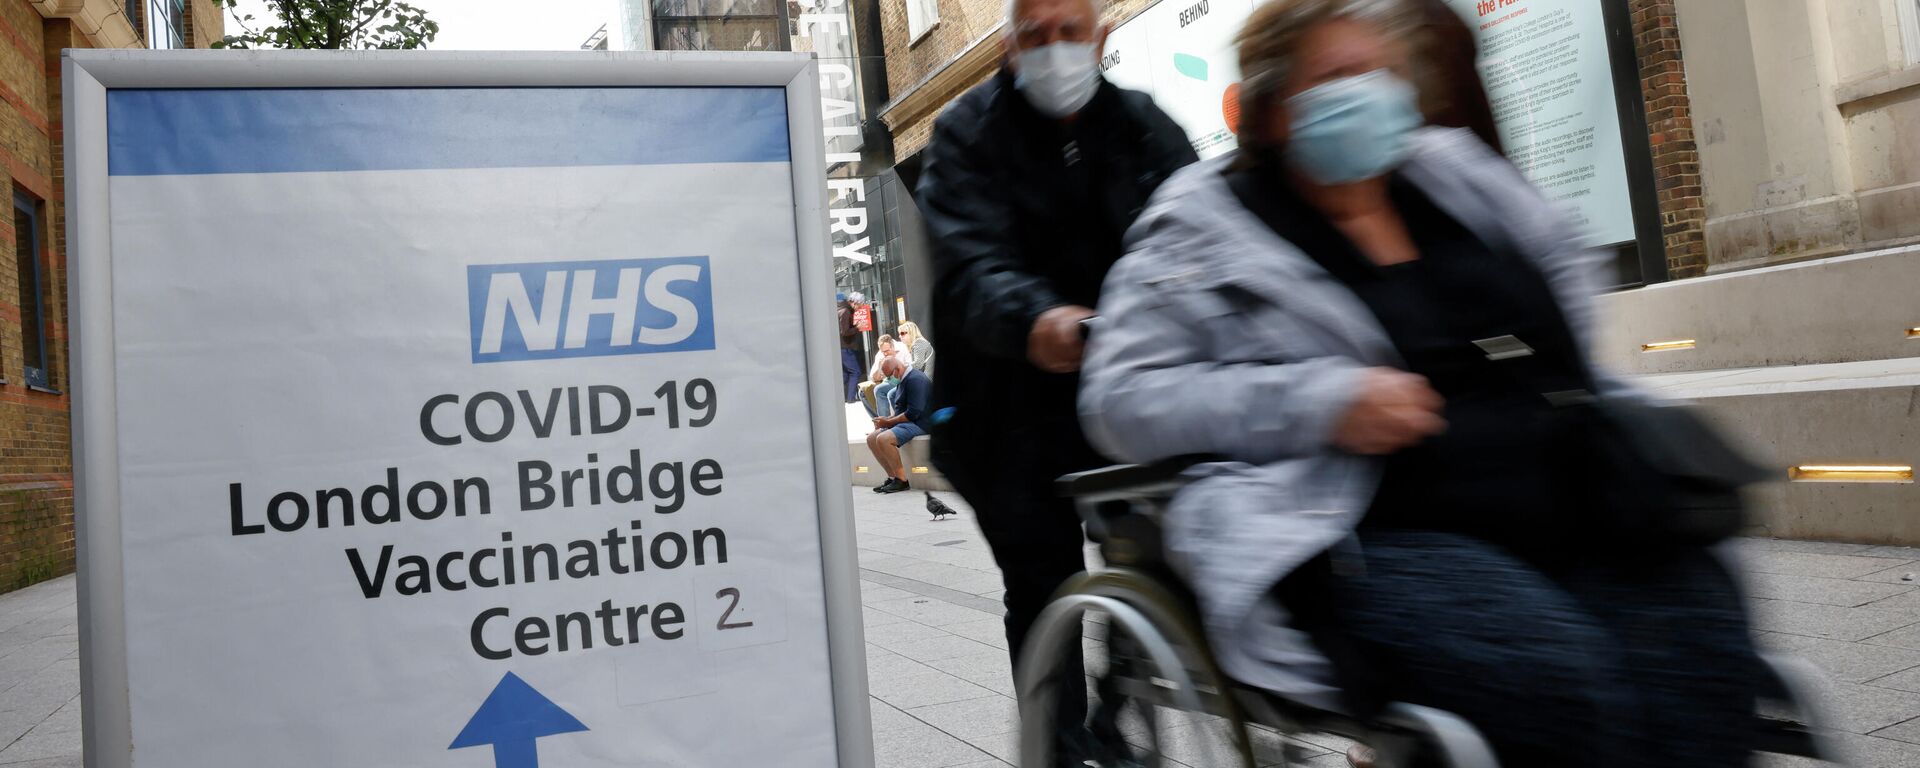 People pass signs indicating the entrance to the London Bridge Vaccination Centre in London on August 9, 2021 - Sputnik International, 1920, 12.10.2021